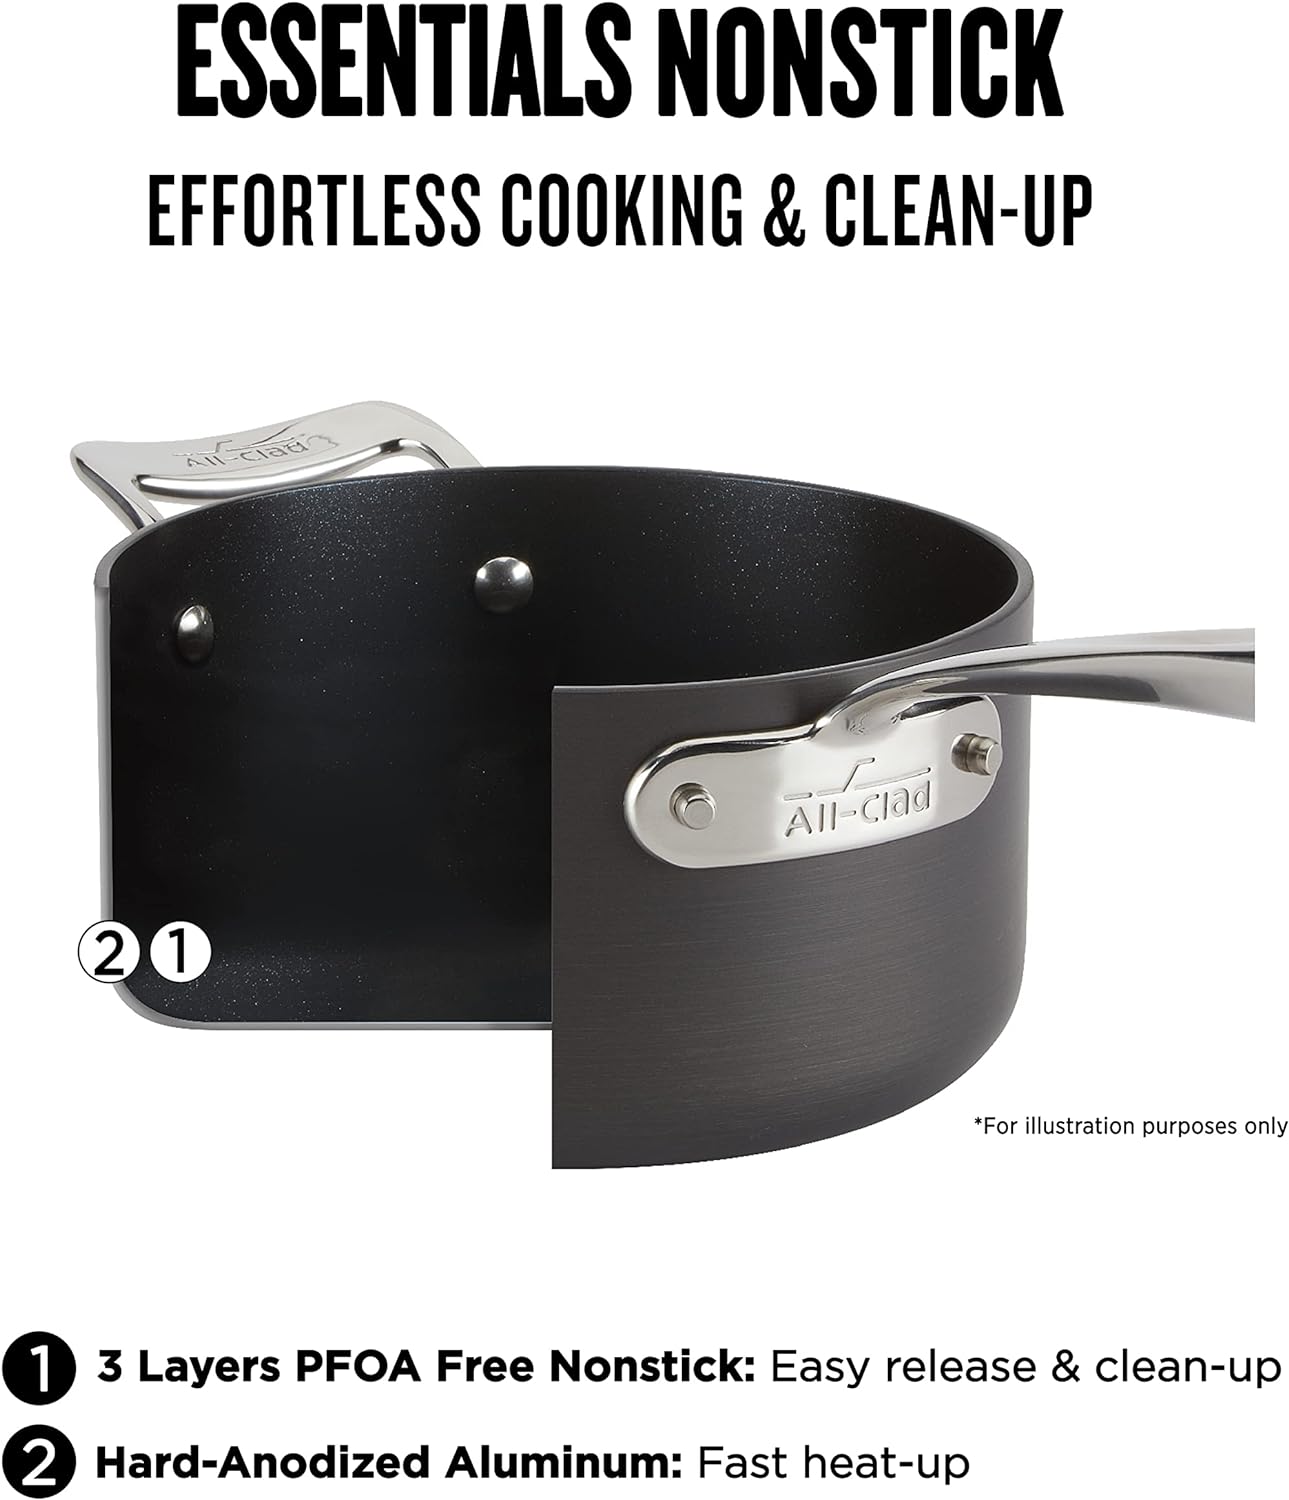 All-Clad Stainless Steel Roaster with Nonstick Rack, 11 x 14 Inches *NEW*